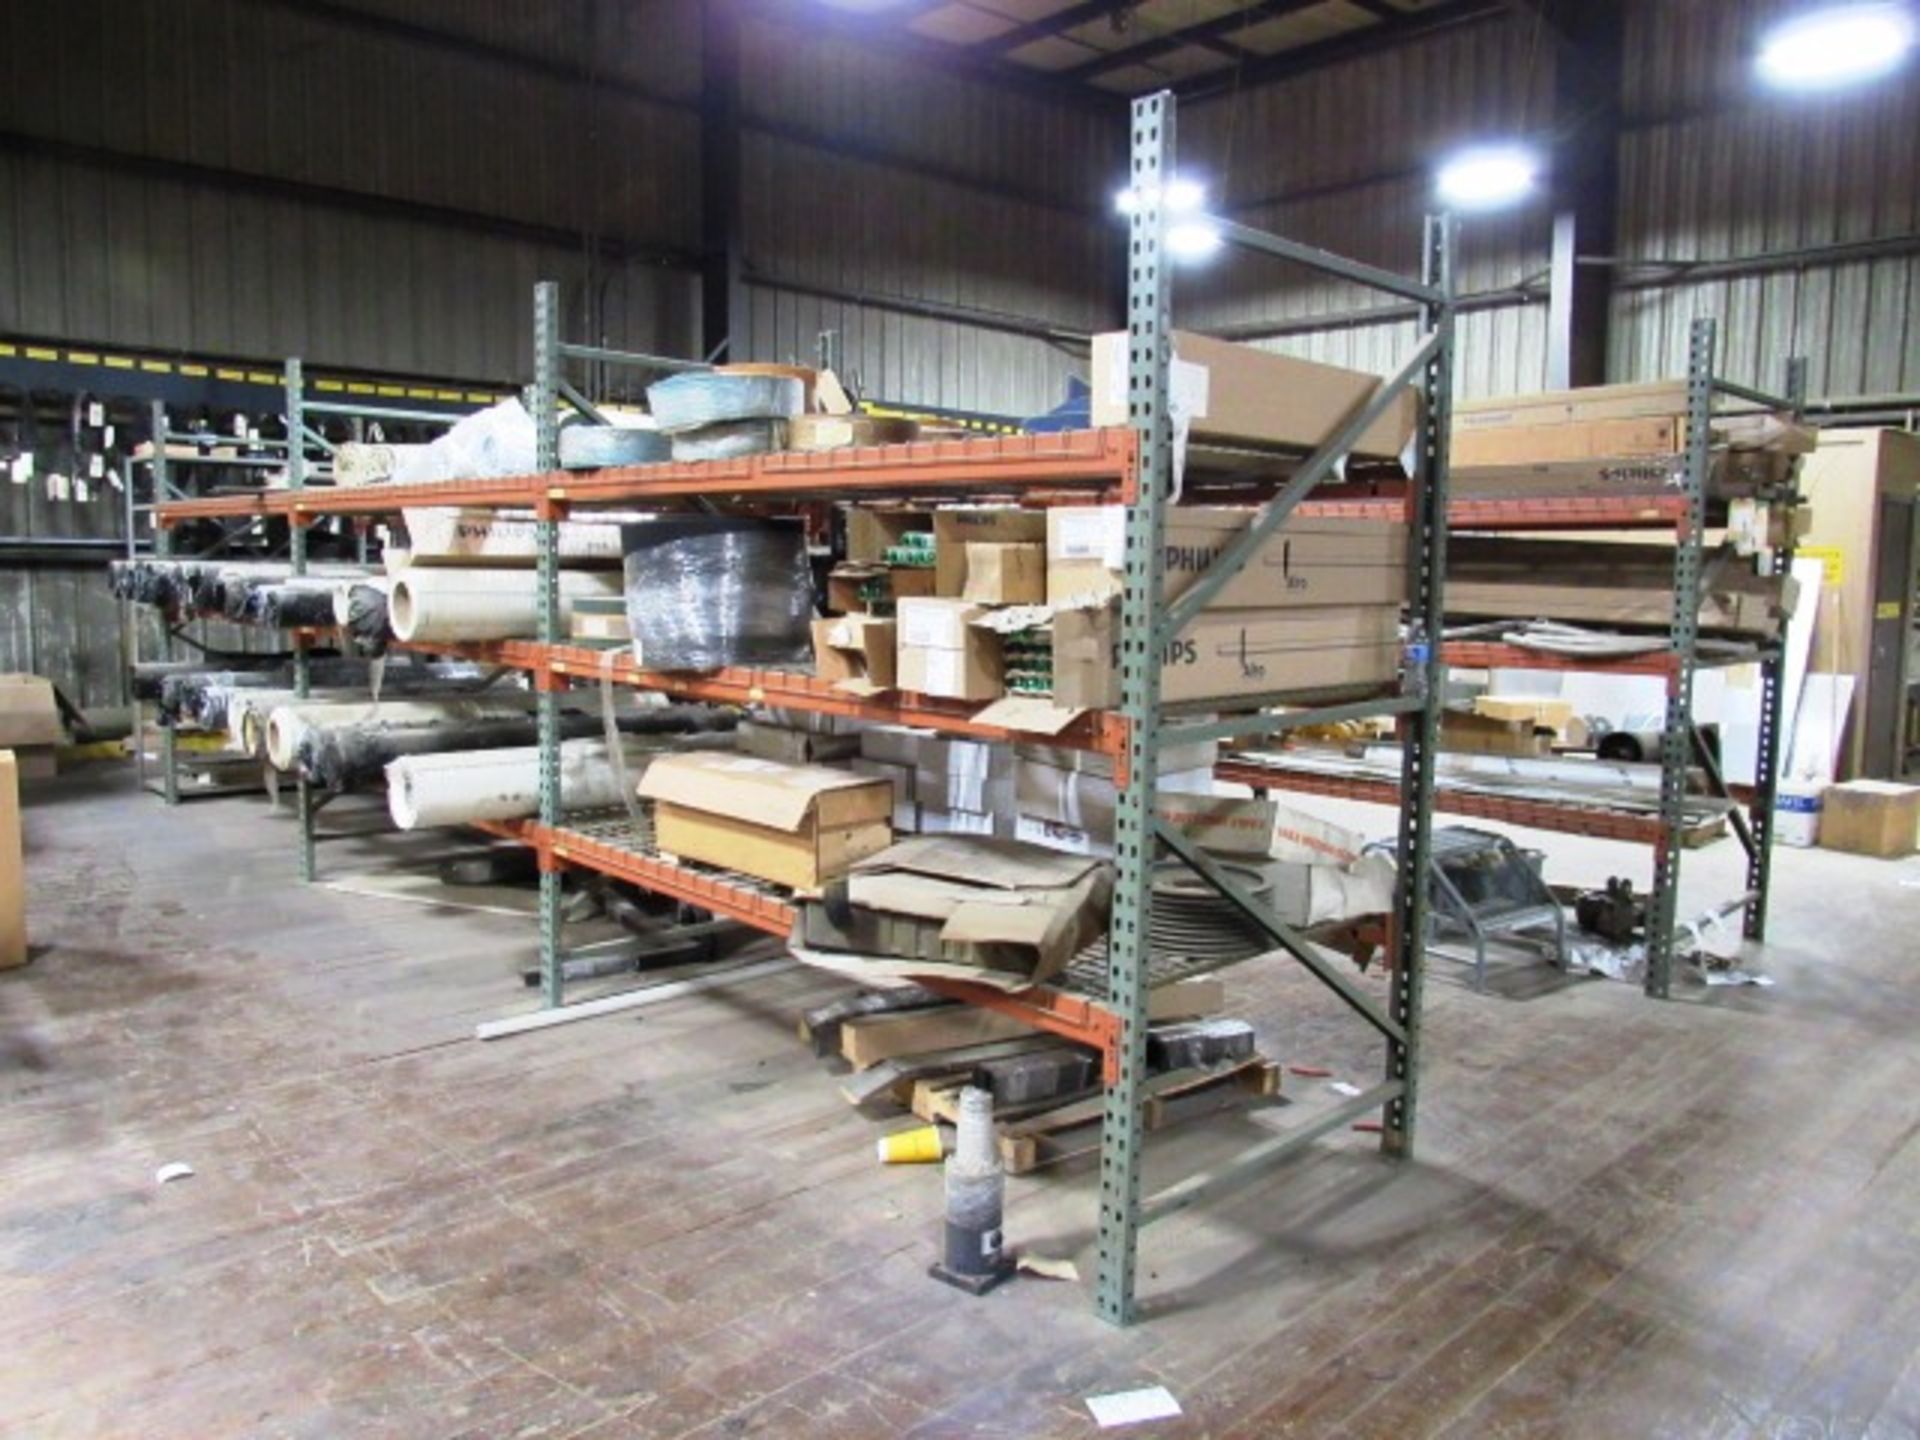 6 Sections of Pallet Racks (no contents)